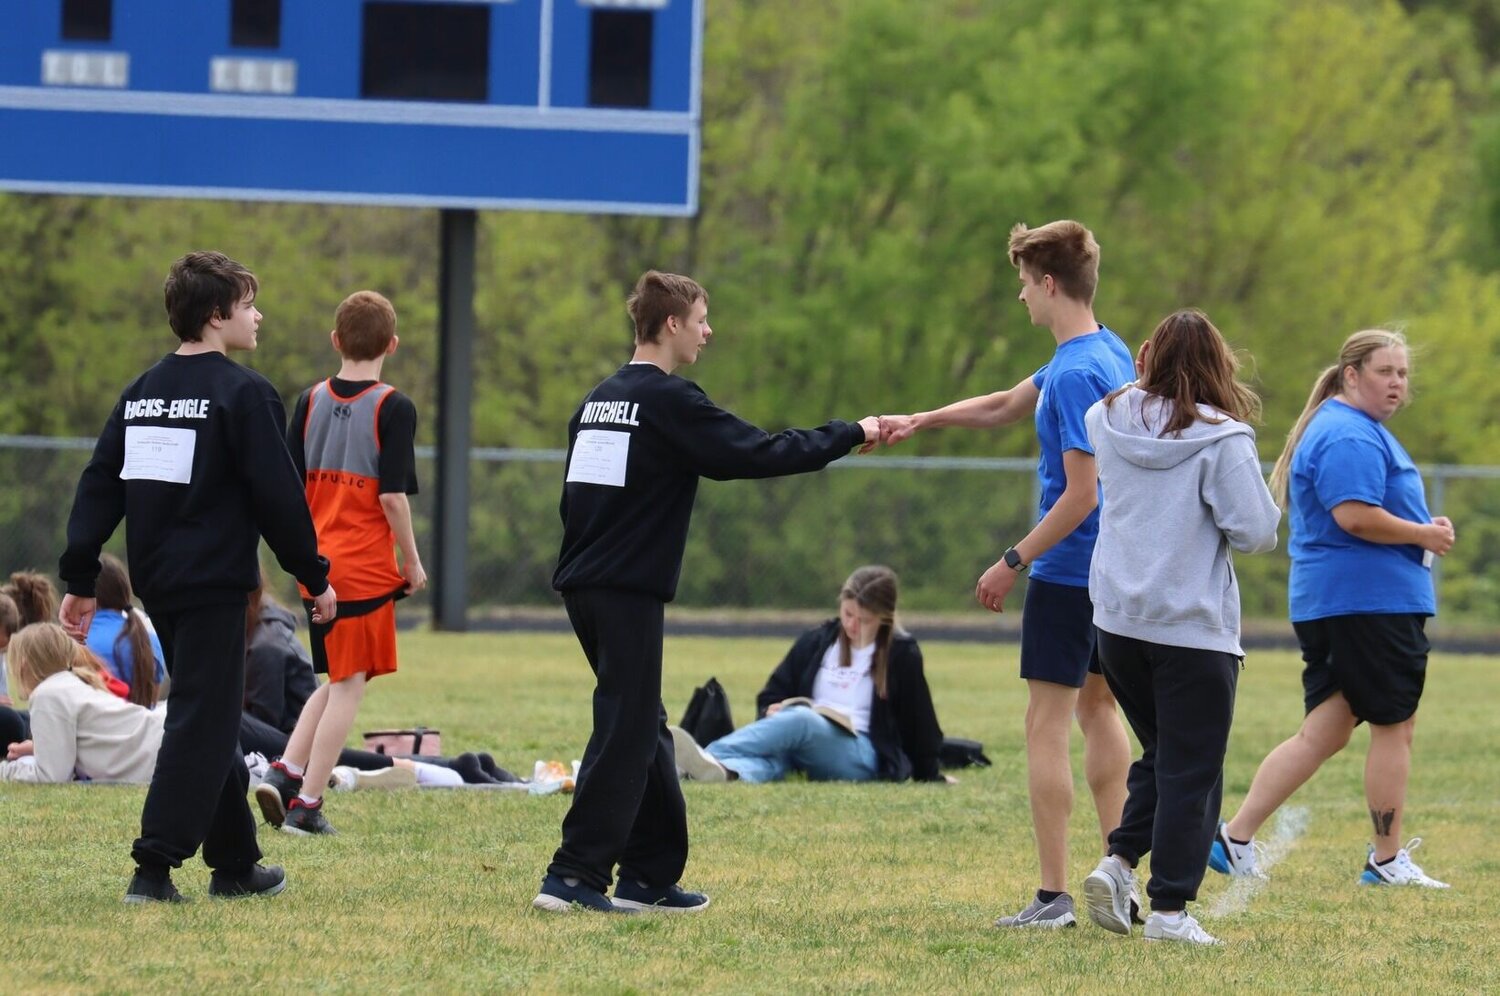 A celebratory fist bump is shared between an MHS athlete and buddy pair at the Special Olympics track meet.